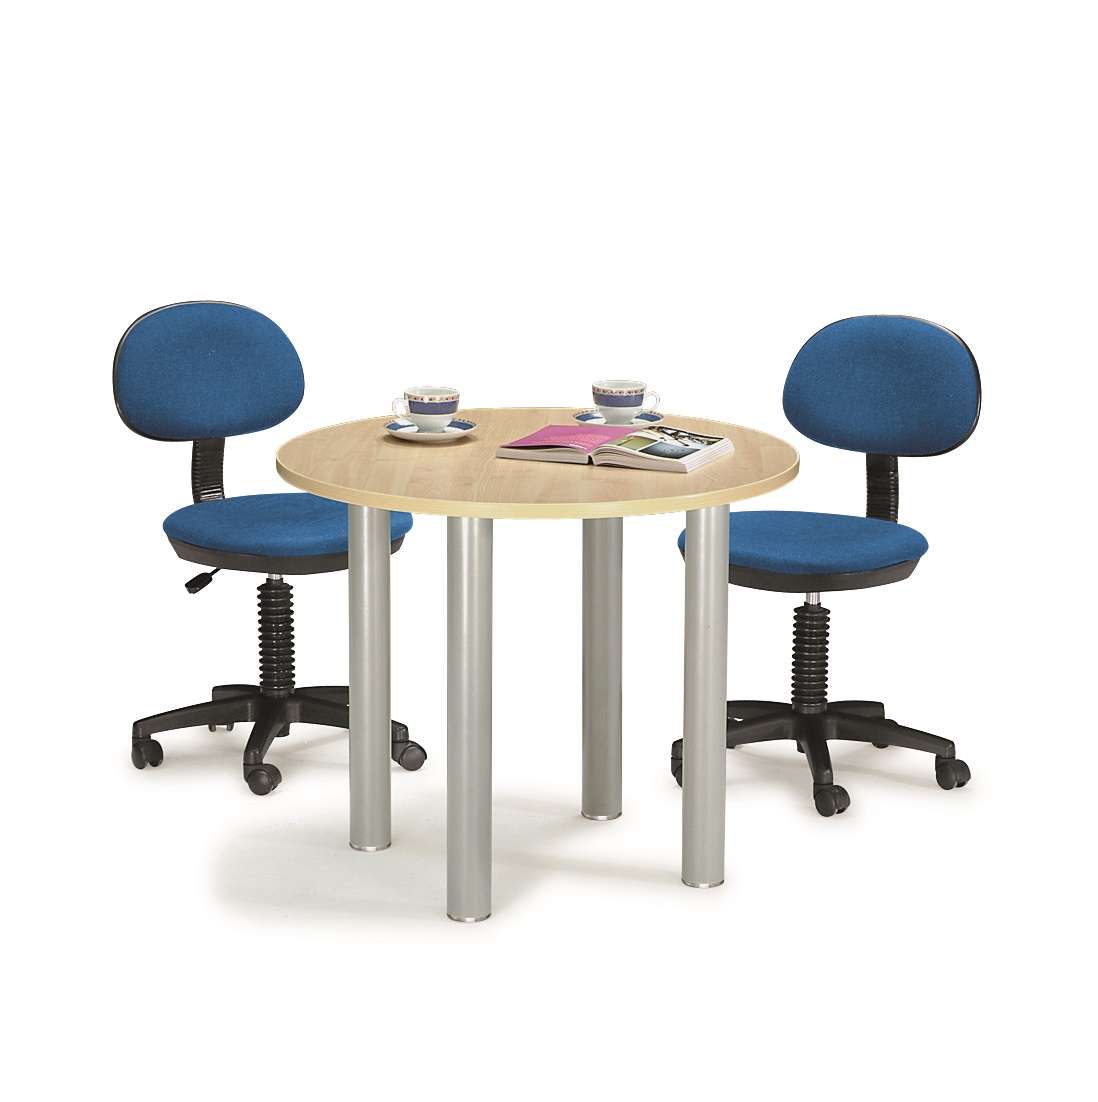 T2-Series Discussion Table